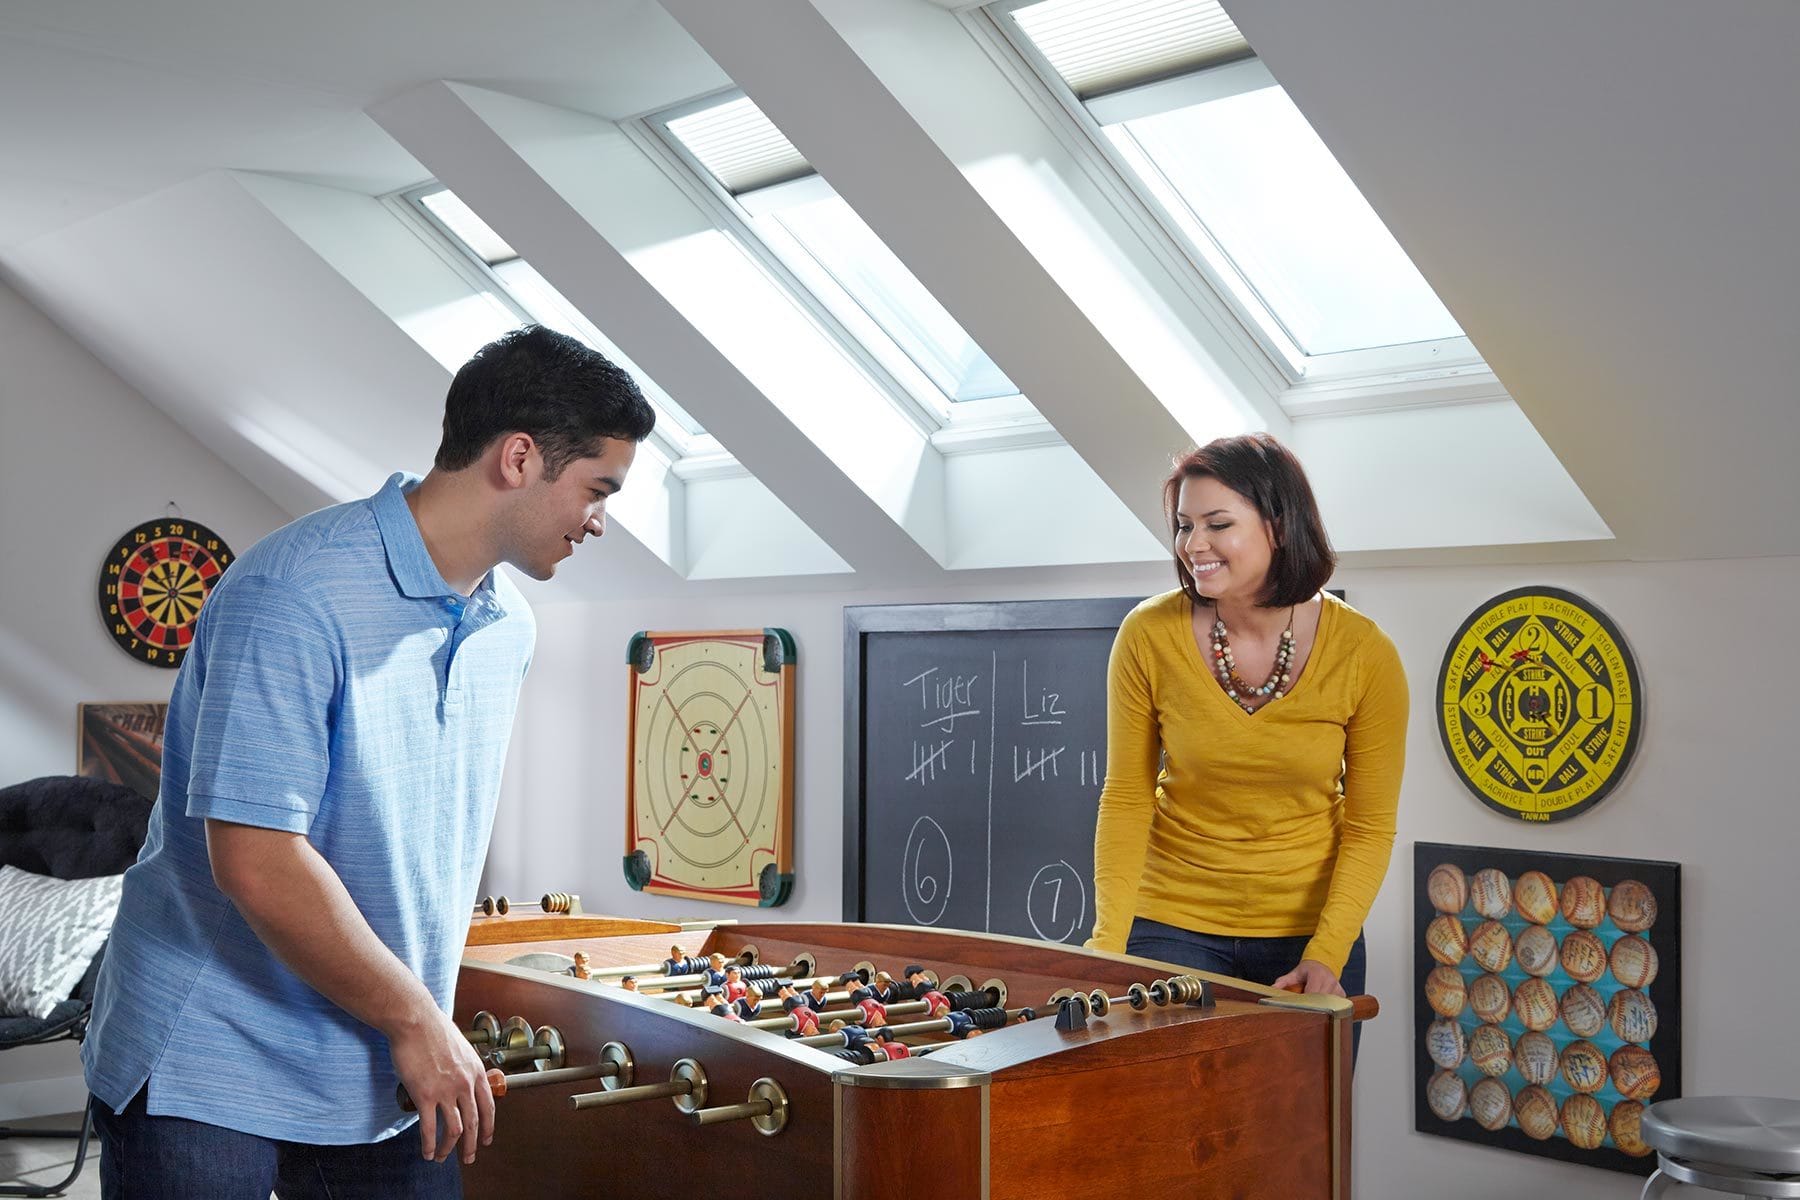 Close up of a man and woman playing on a foosball table in a bonus room under three skylights